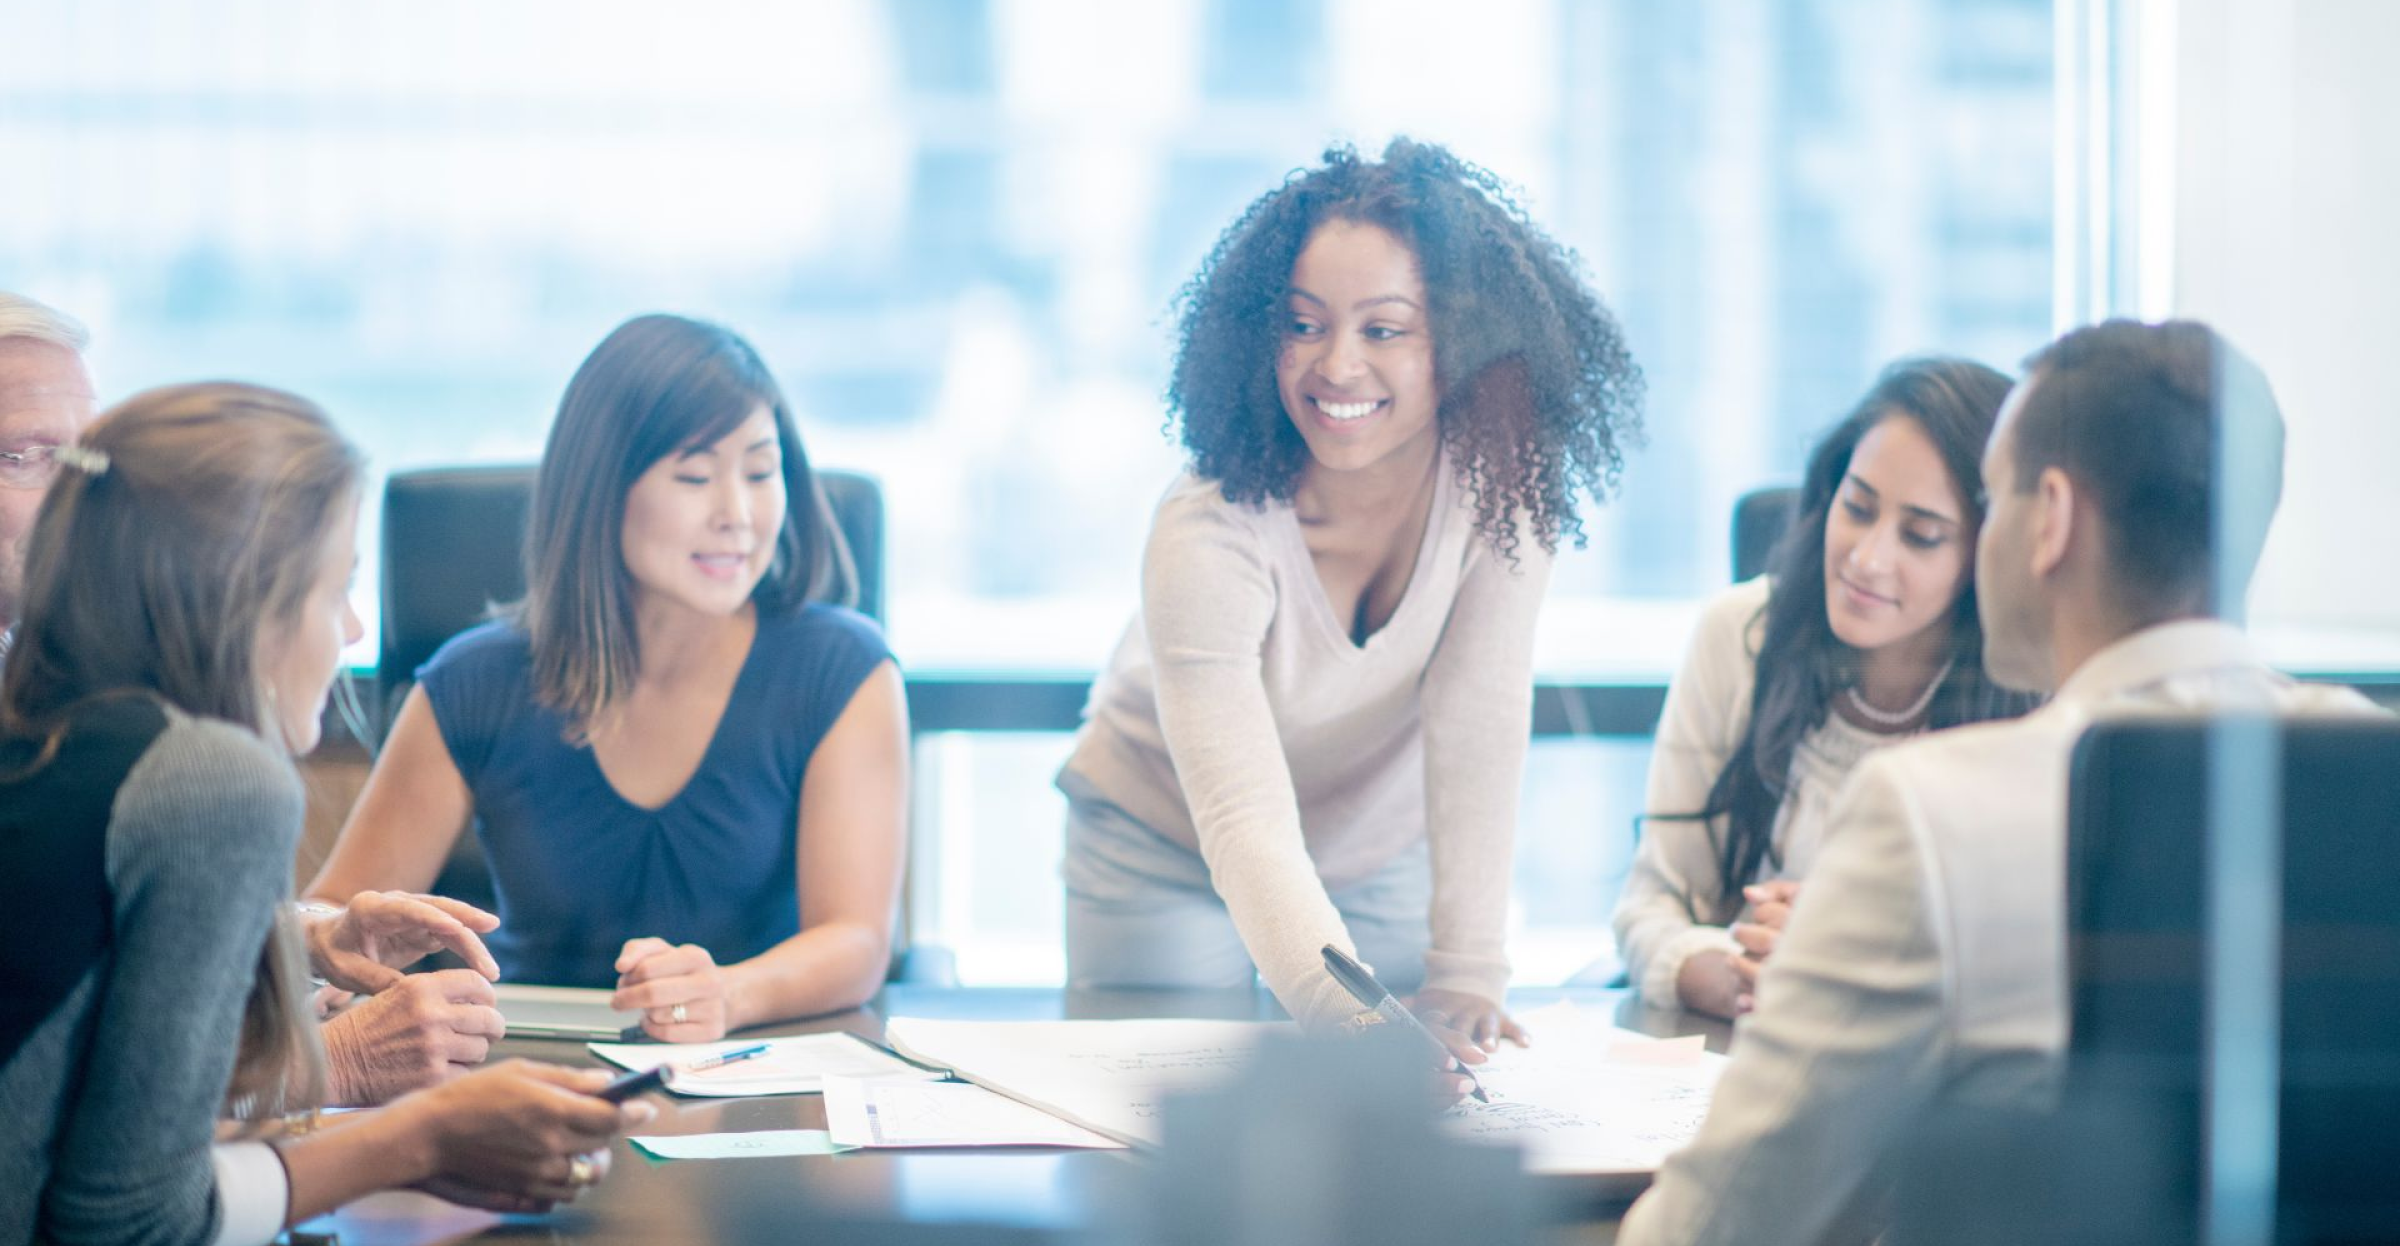 Why you should care about active diversity in the boardroom